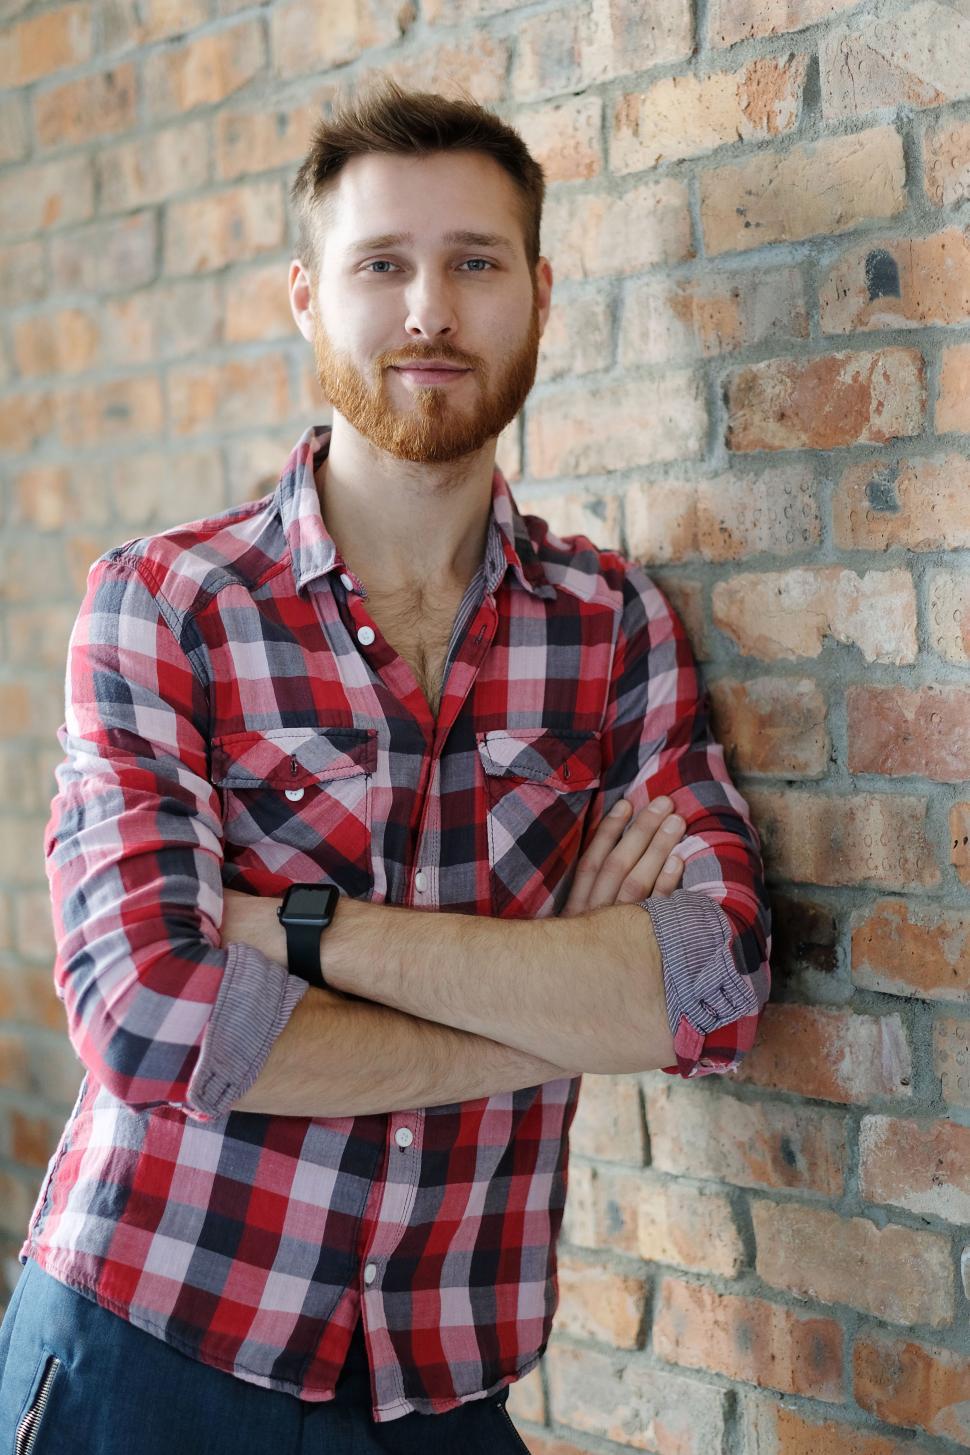 Free Image of Guy in flannel shirt 